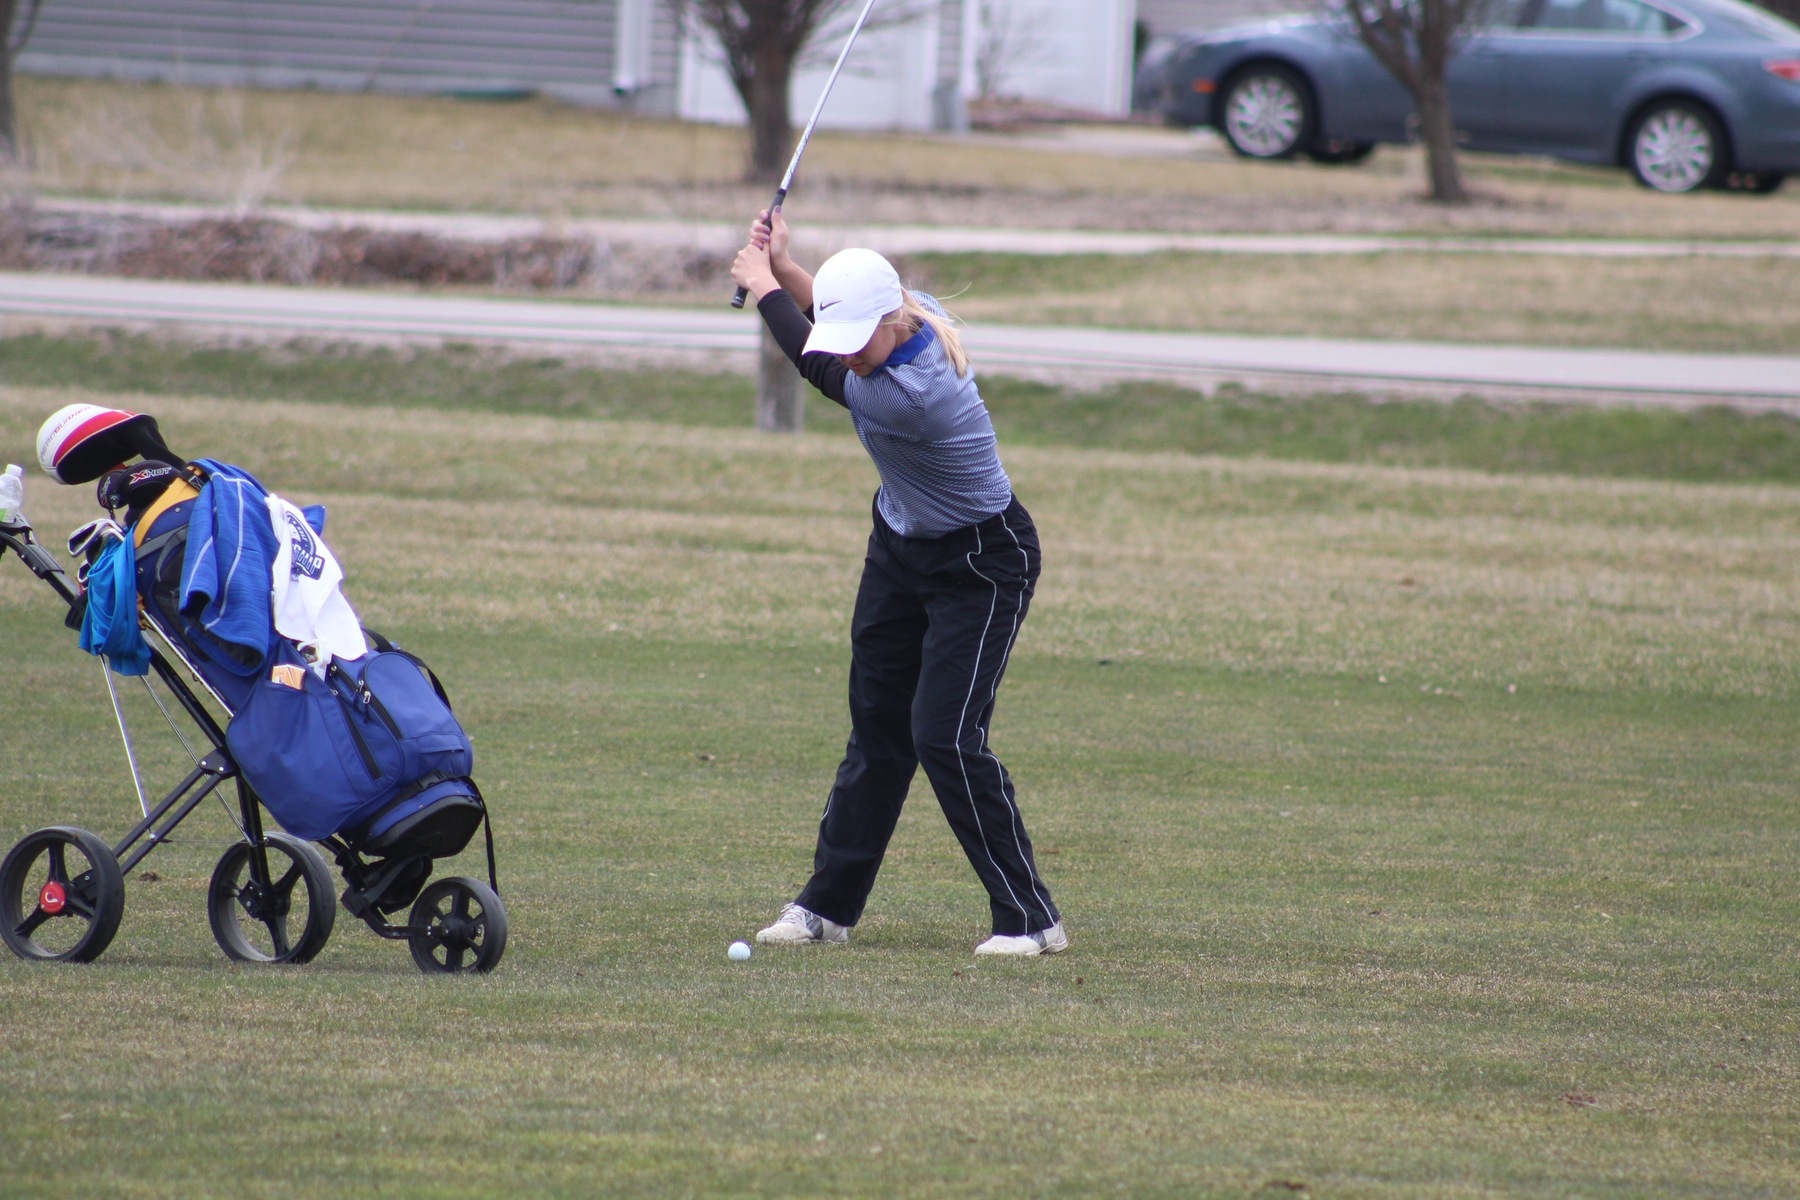 Courtney Tusler hits her approach shot to the green during first round of regional golf tournament Friday in Ankeny.